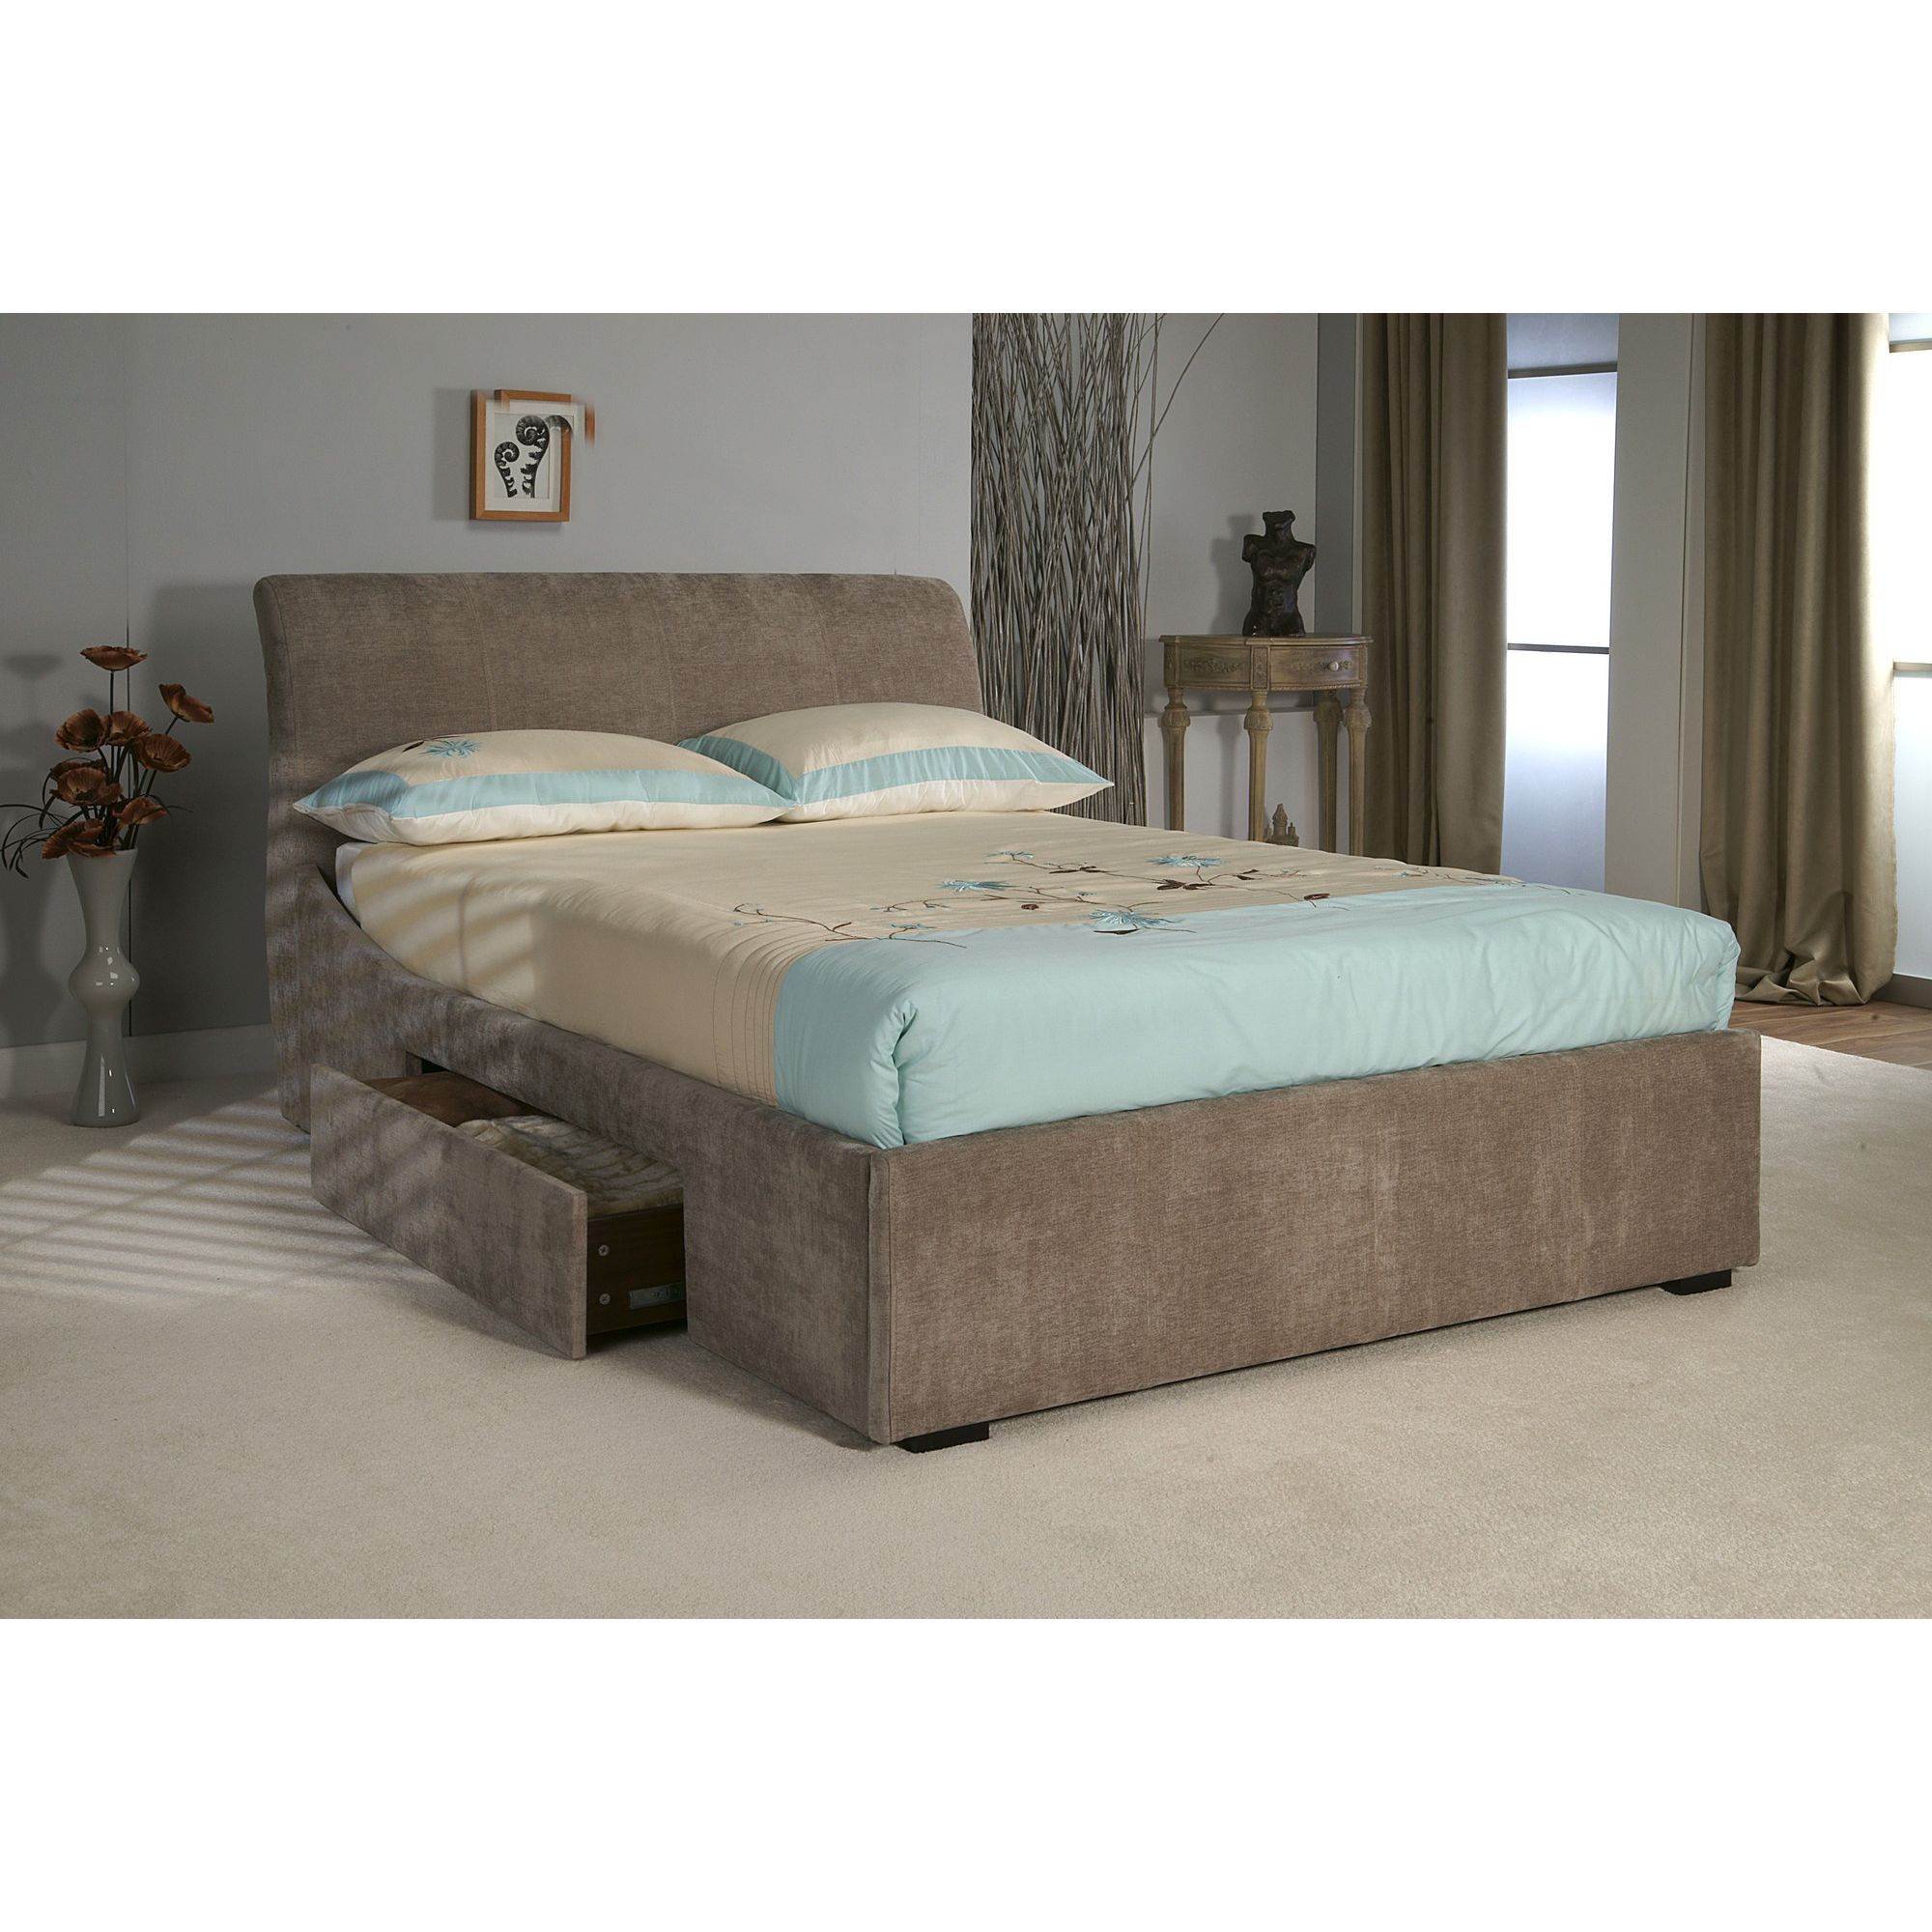 Limelight Oberon Bedstead with Storage - Super King at Tesco Direct